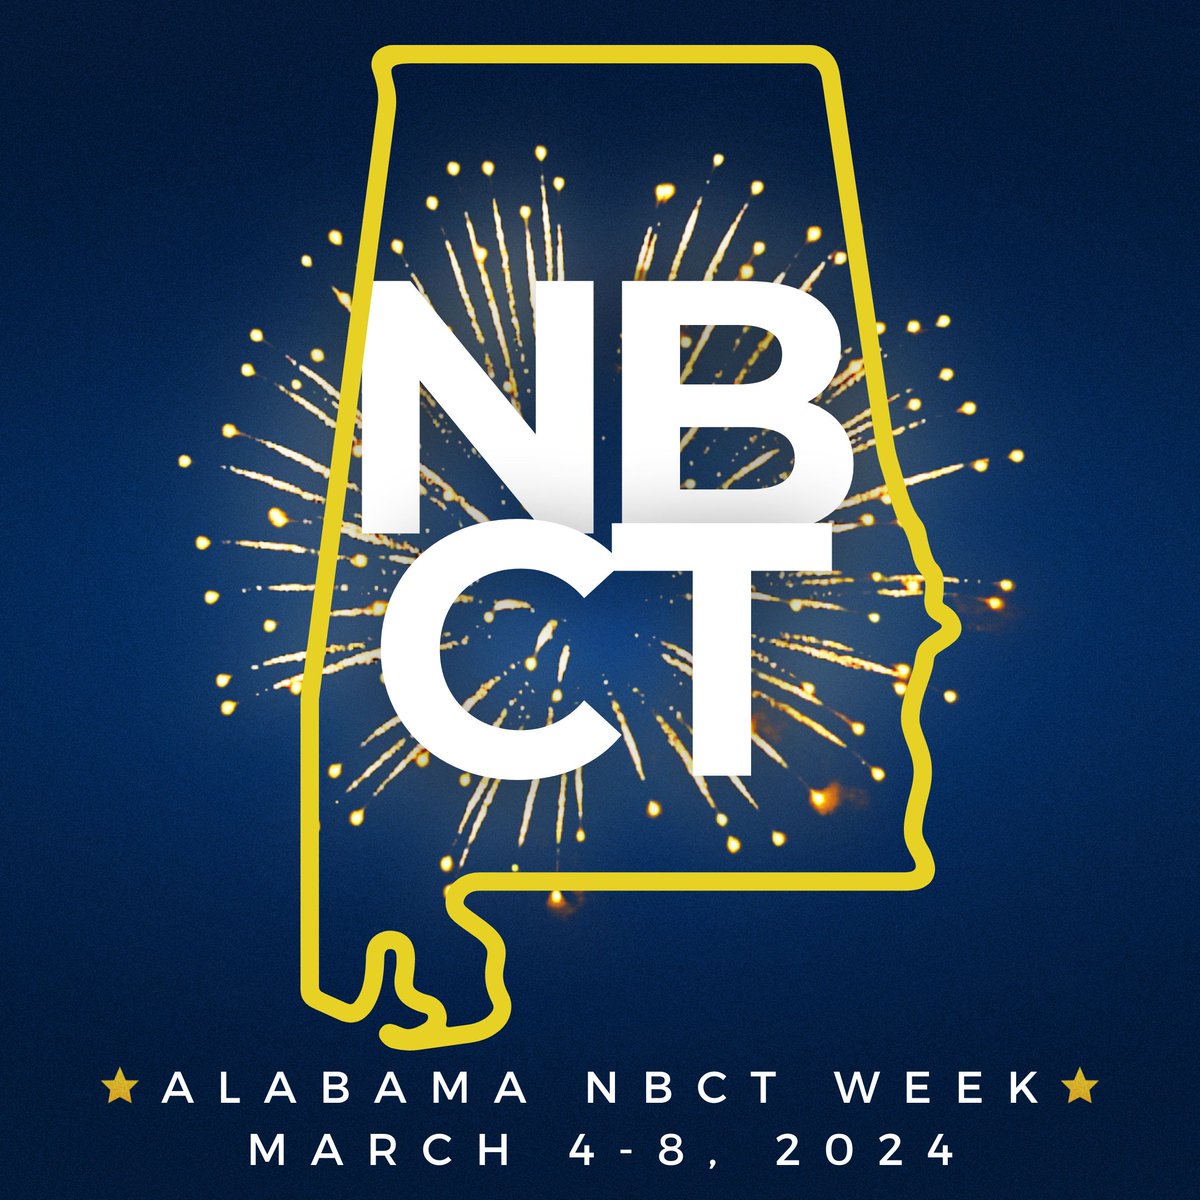 Getting ready to kick off Alabama NBCT Week tomorrow with Motivation Monday! Share your best advice for new teachers or for those who are starting their journey toward becoming a NBCT! We can't wait to celebrate you all week long! #alnbctnetwork @NBPTS @AlabamaAchieves